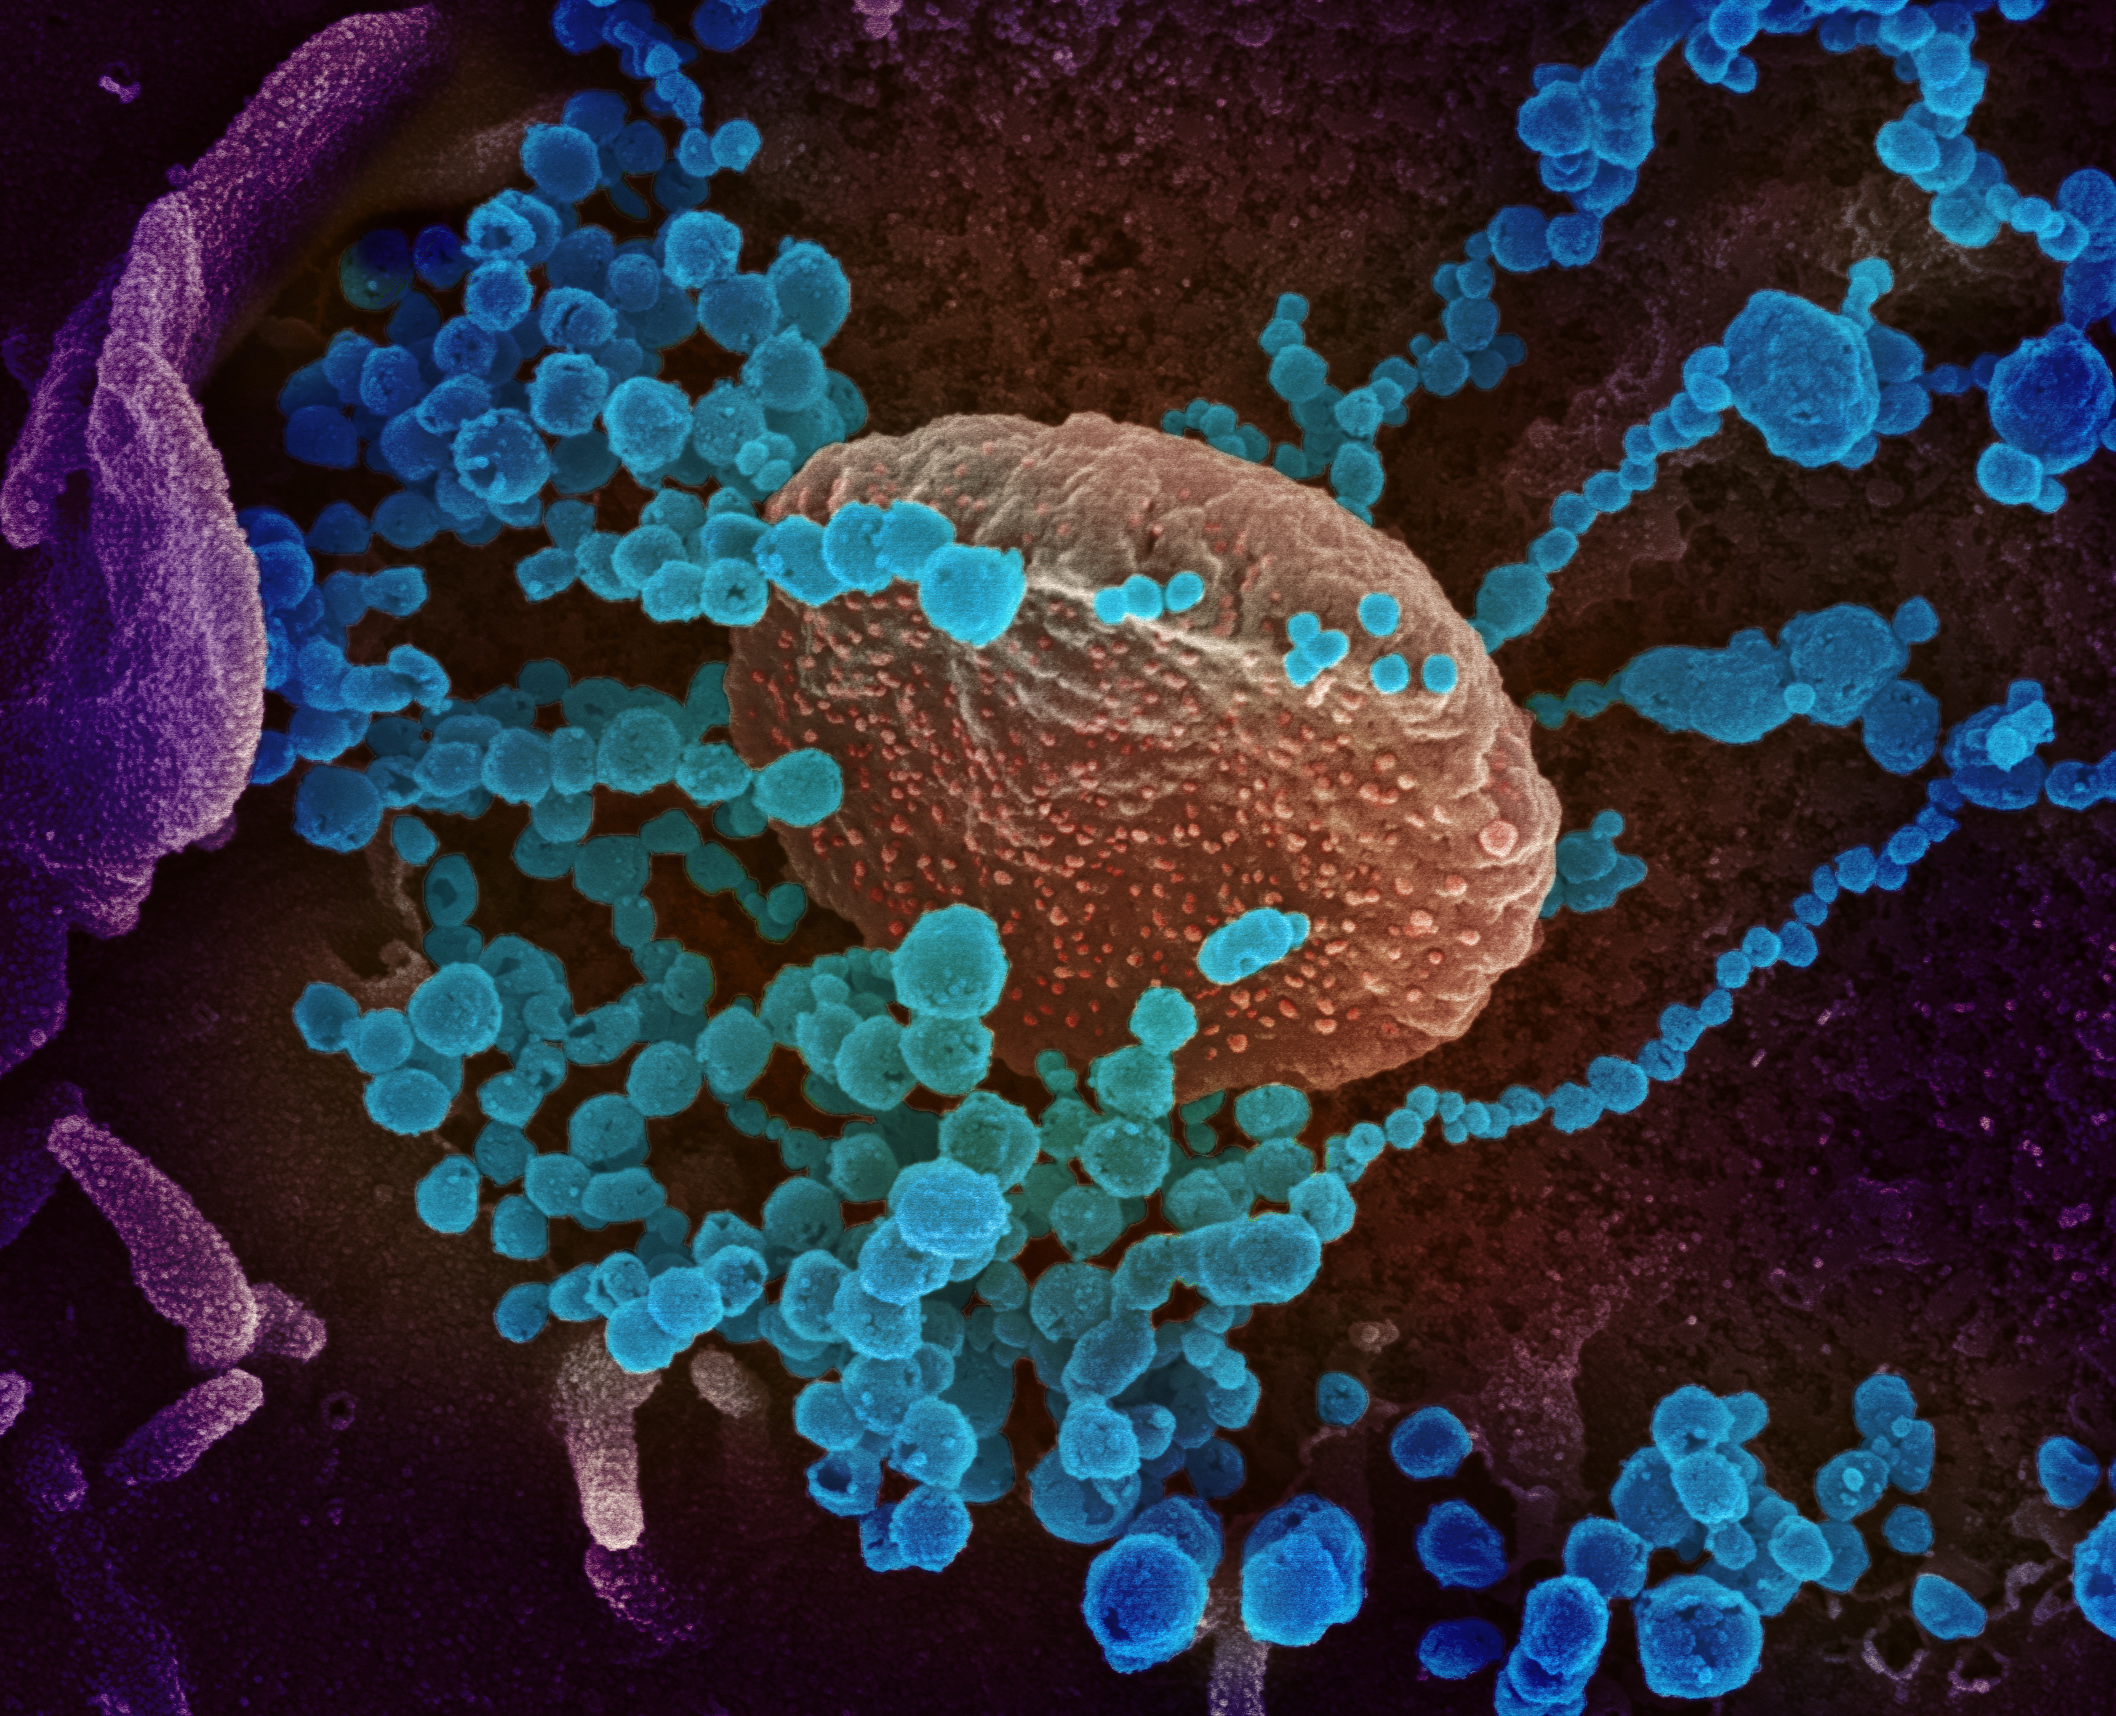 Microscopic view of numerous particles of SARS-CoV-2 labeled blue emerging from an infected cell.